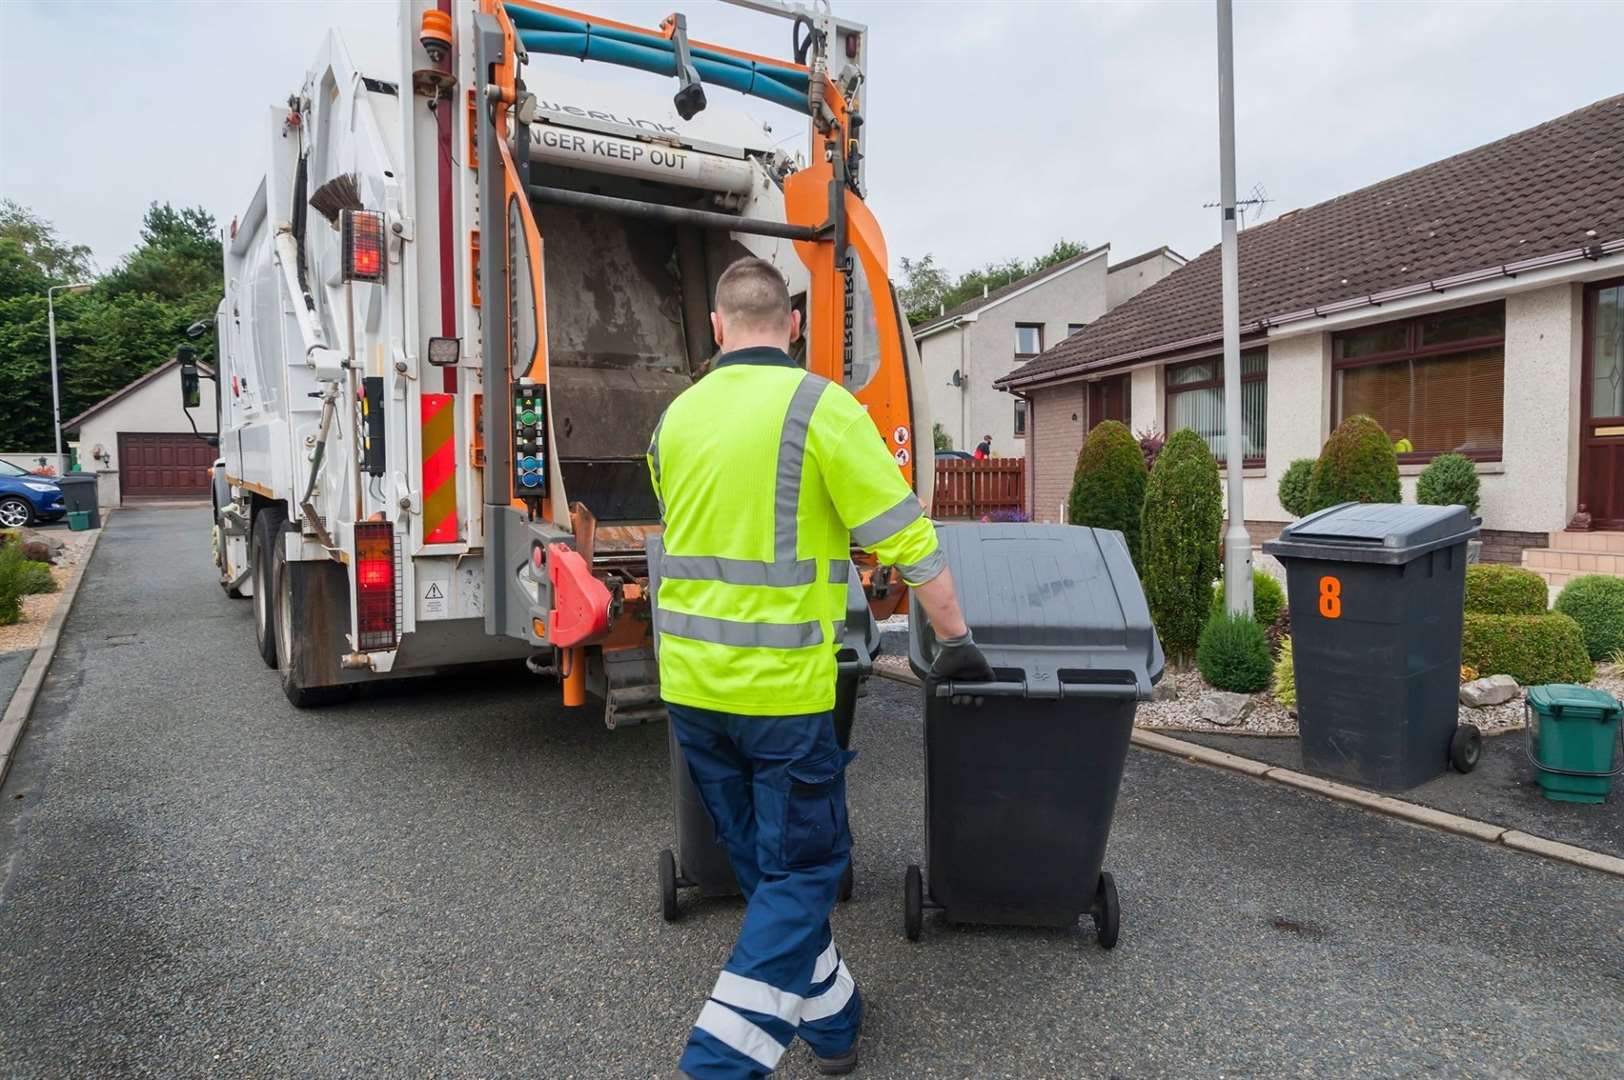 Councillors are being asked to approve a change to household bin collections in Aberdeenshire which will see them move to a three-week cycle.